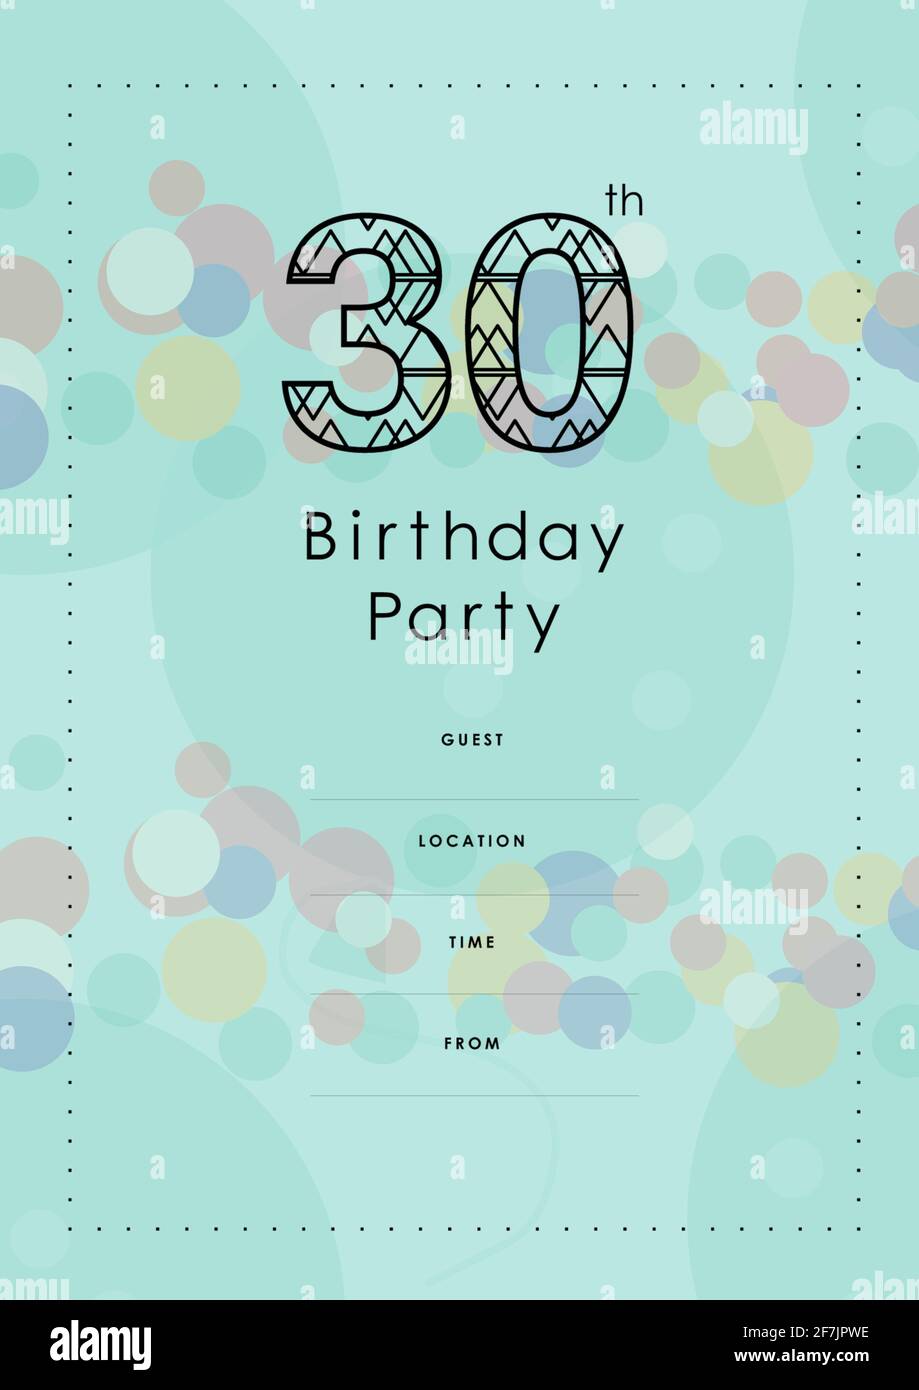 30 birthday party written in black with coloured circles, invite with details on blue background Stock Photo